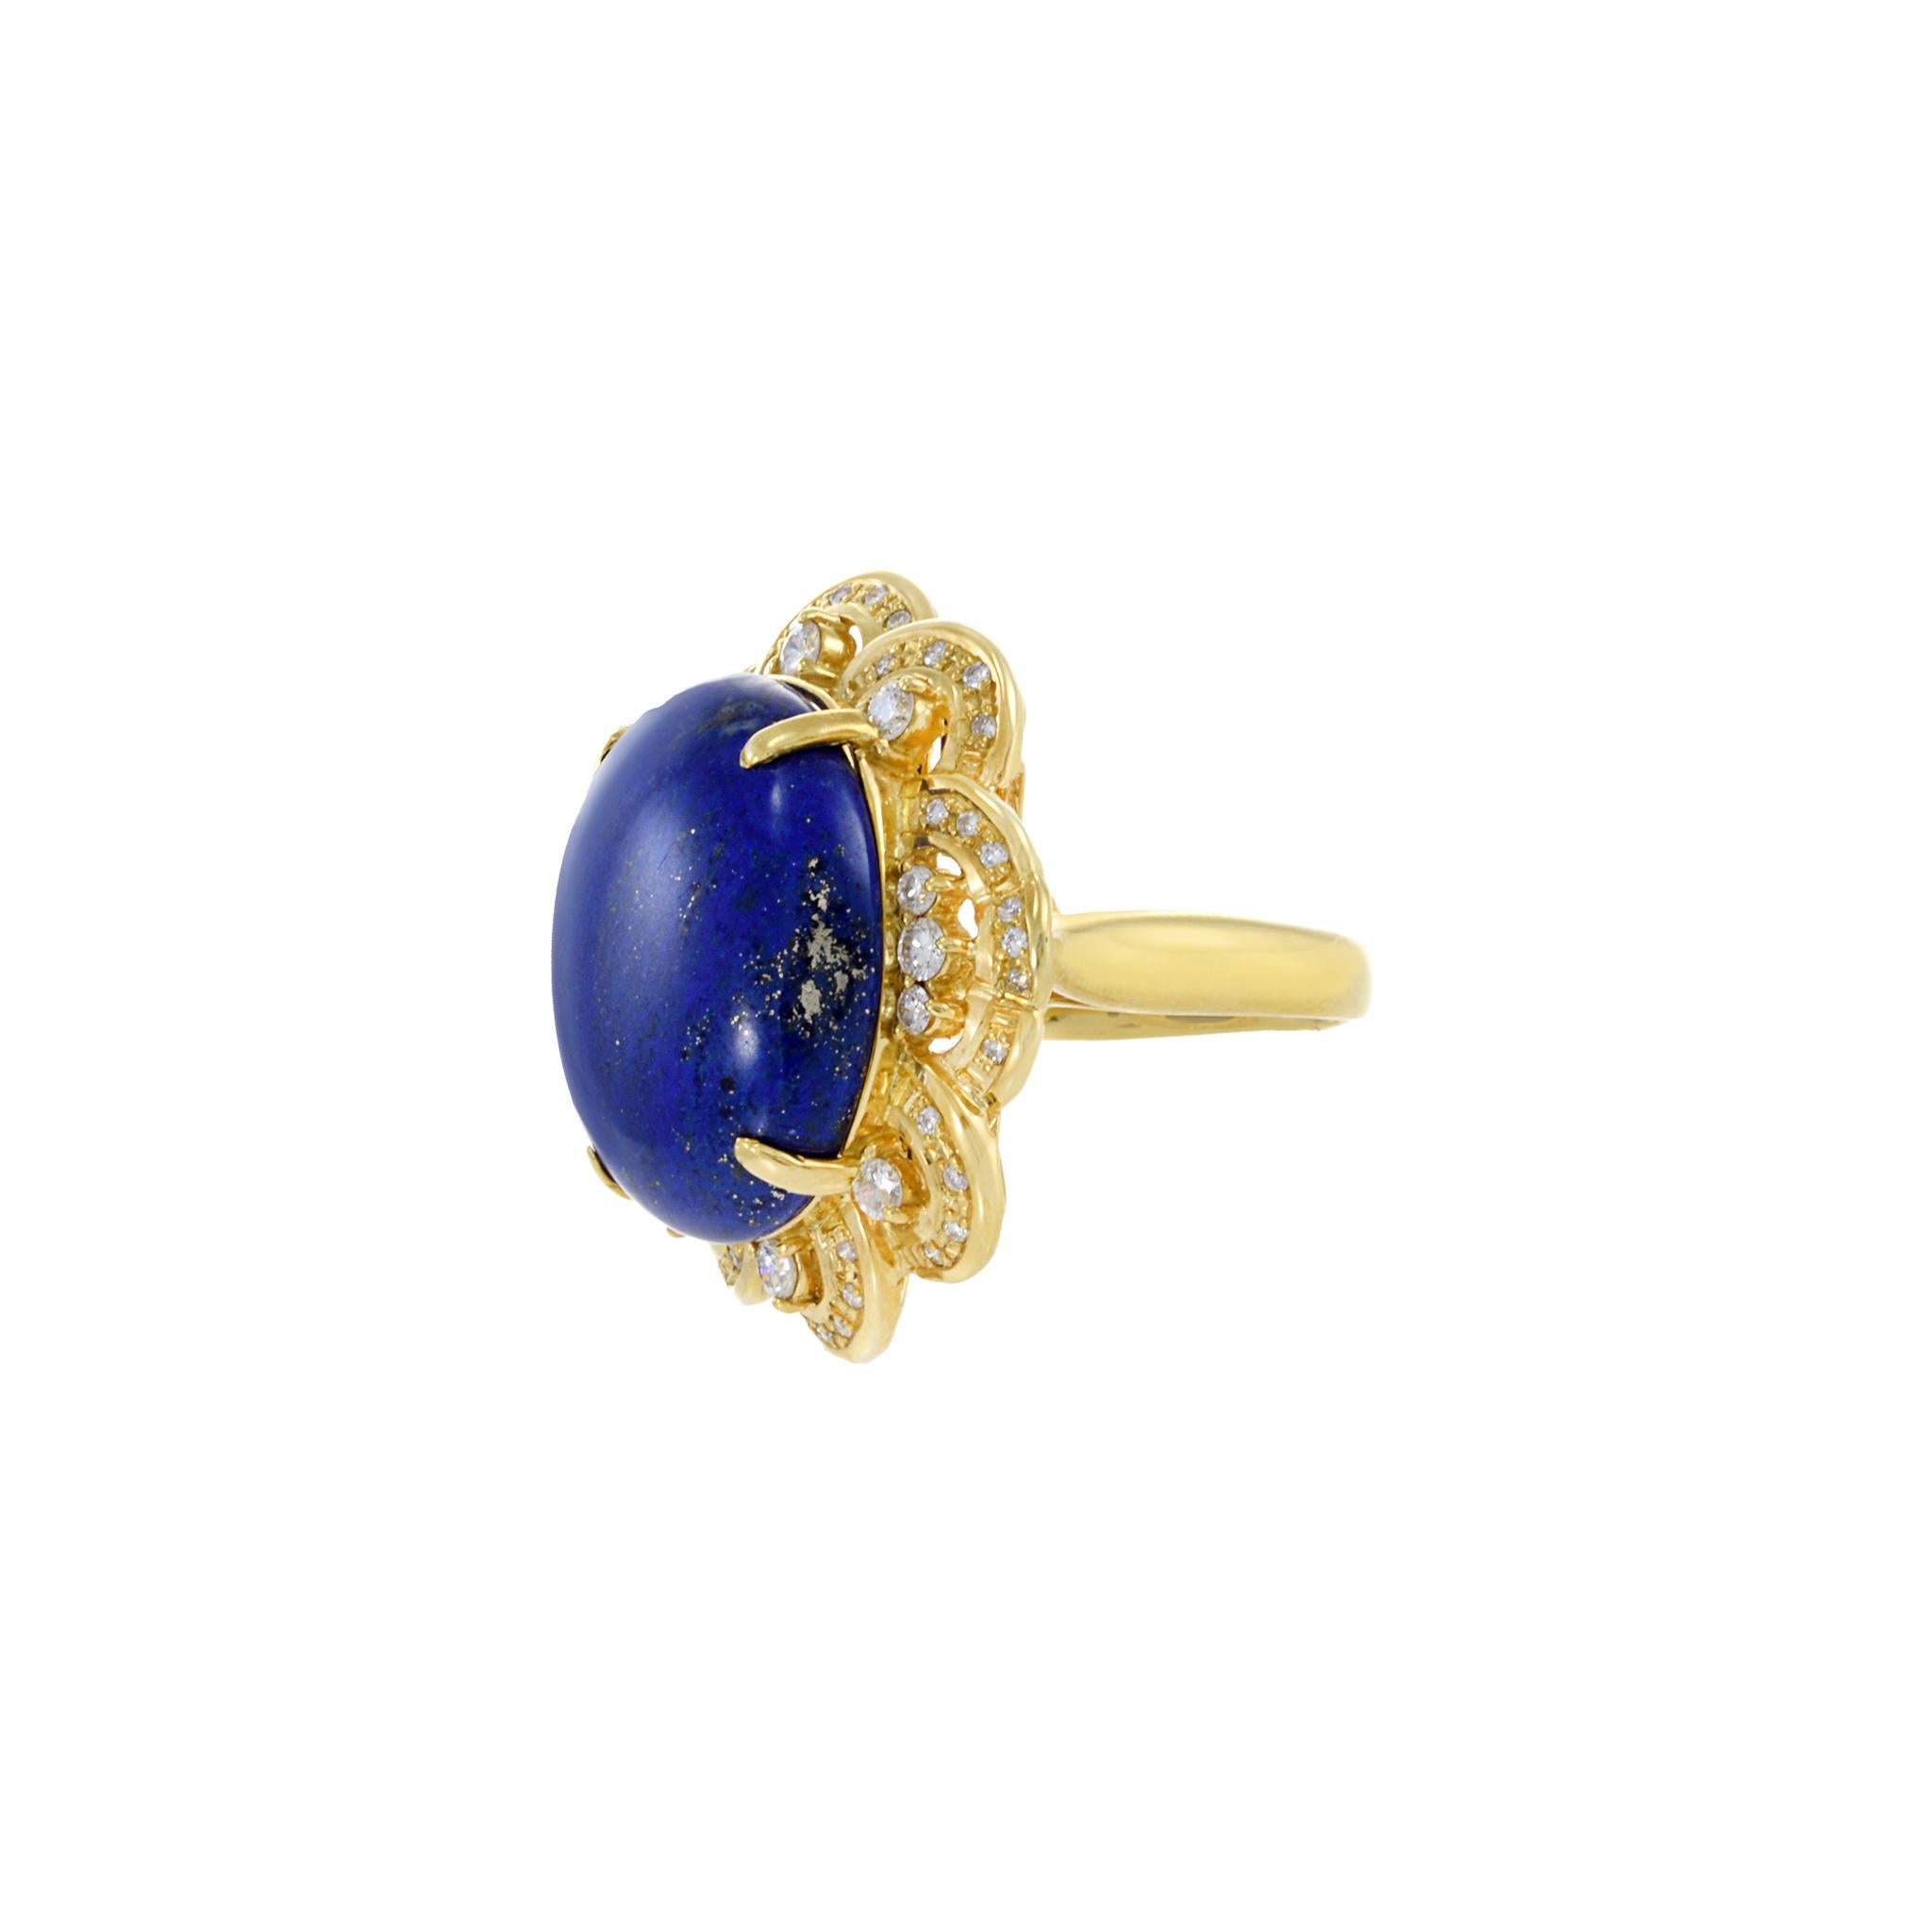 Retro Era 18KT Yellow Gold Lapis Lazuli And Diamond Ring In Good Condition For Sale In New York, NY